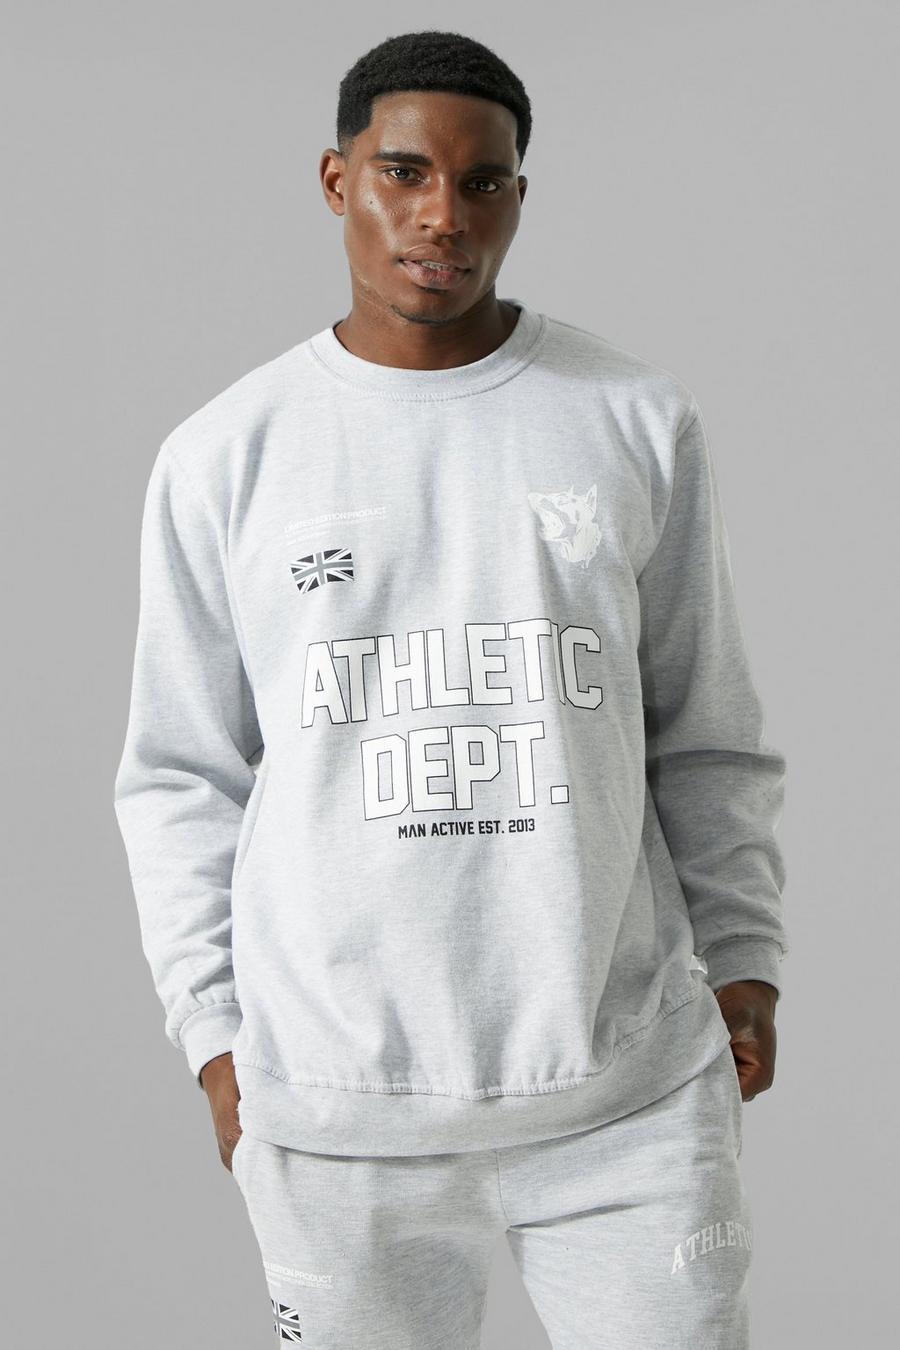 Grey marl Man Active Oversized Athletic Dept. Sweater image number 1